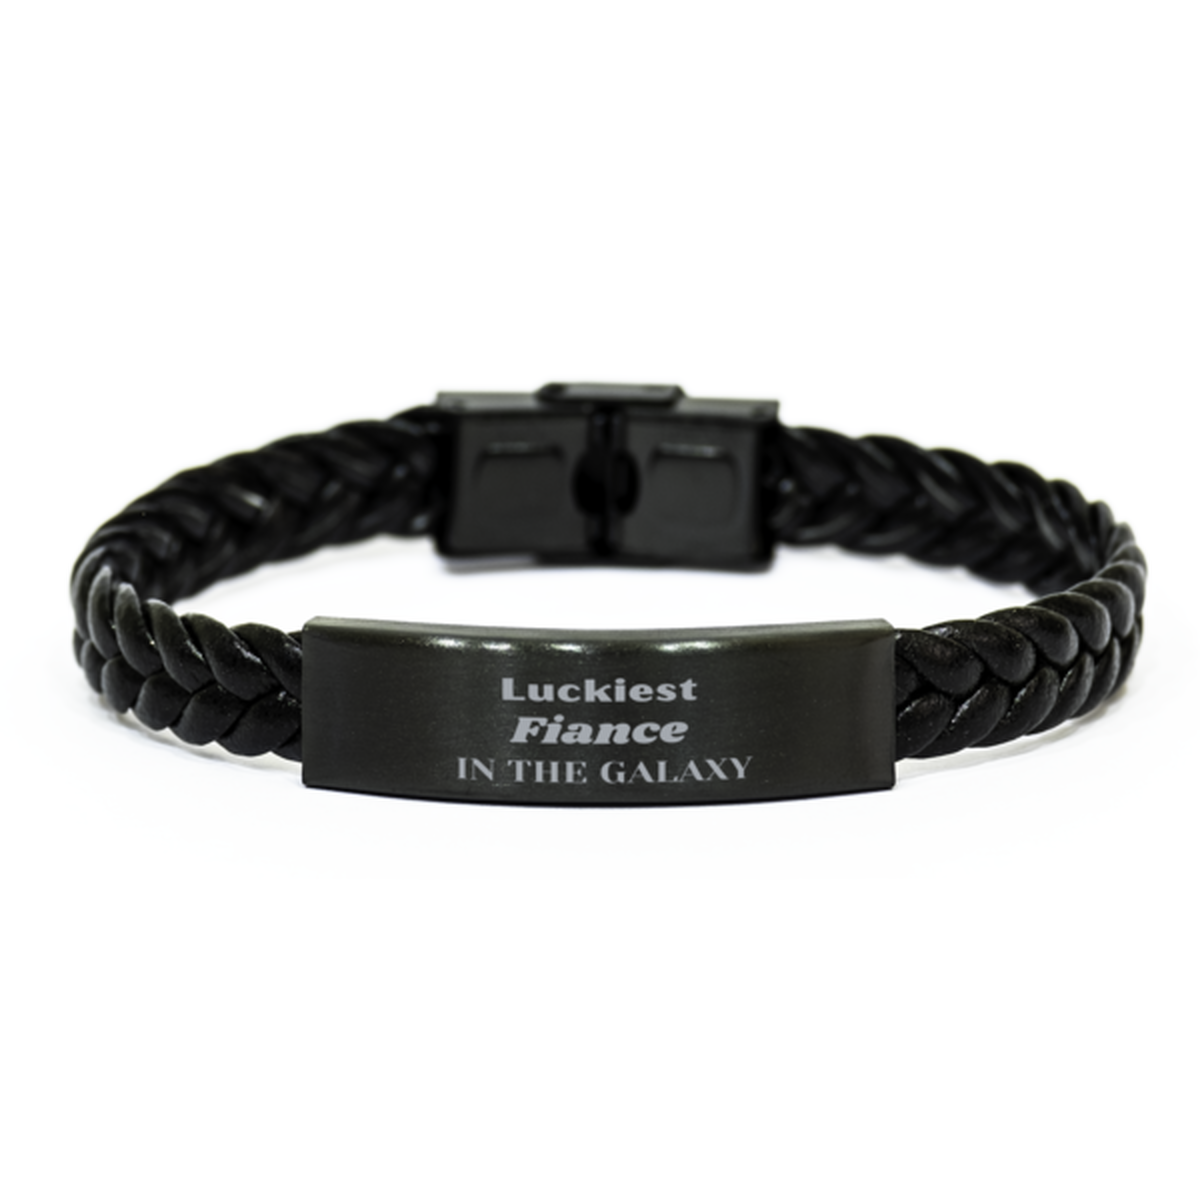 Luckiest Fiance in the Galaxy, To My Fiance Engraved Gifts, Christmas Fiance Braided Leather Bracelet Gifts, X-mas Birthday Unique Gifts For Fiance Men Women